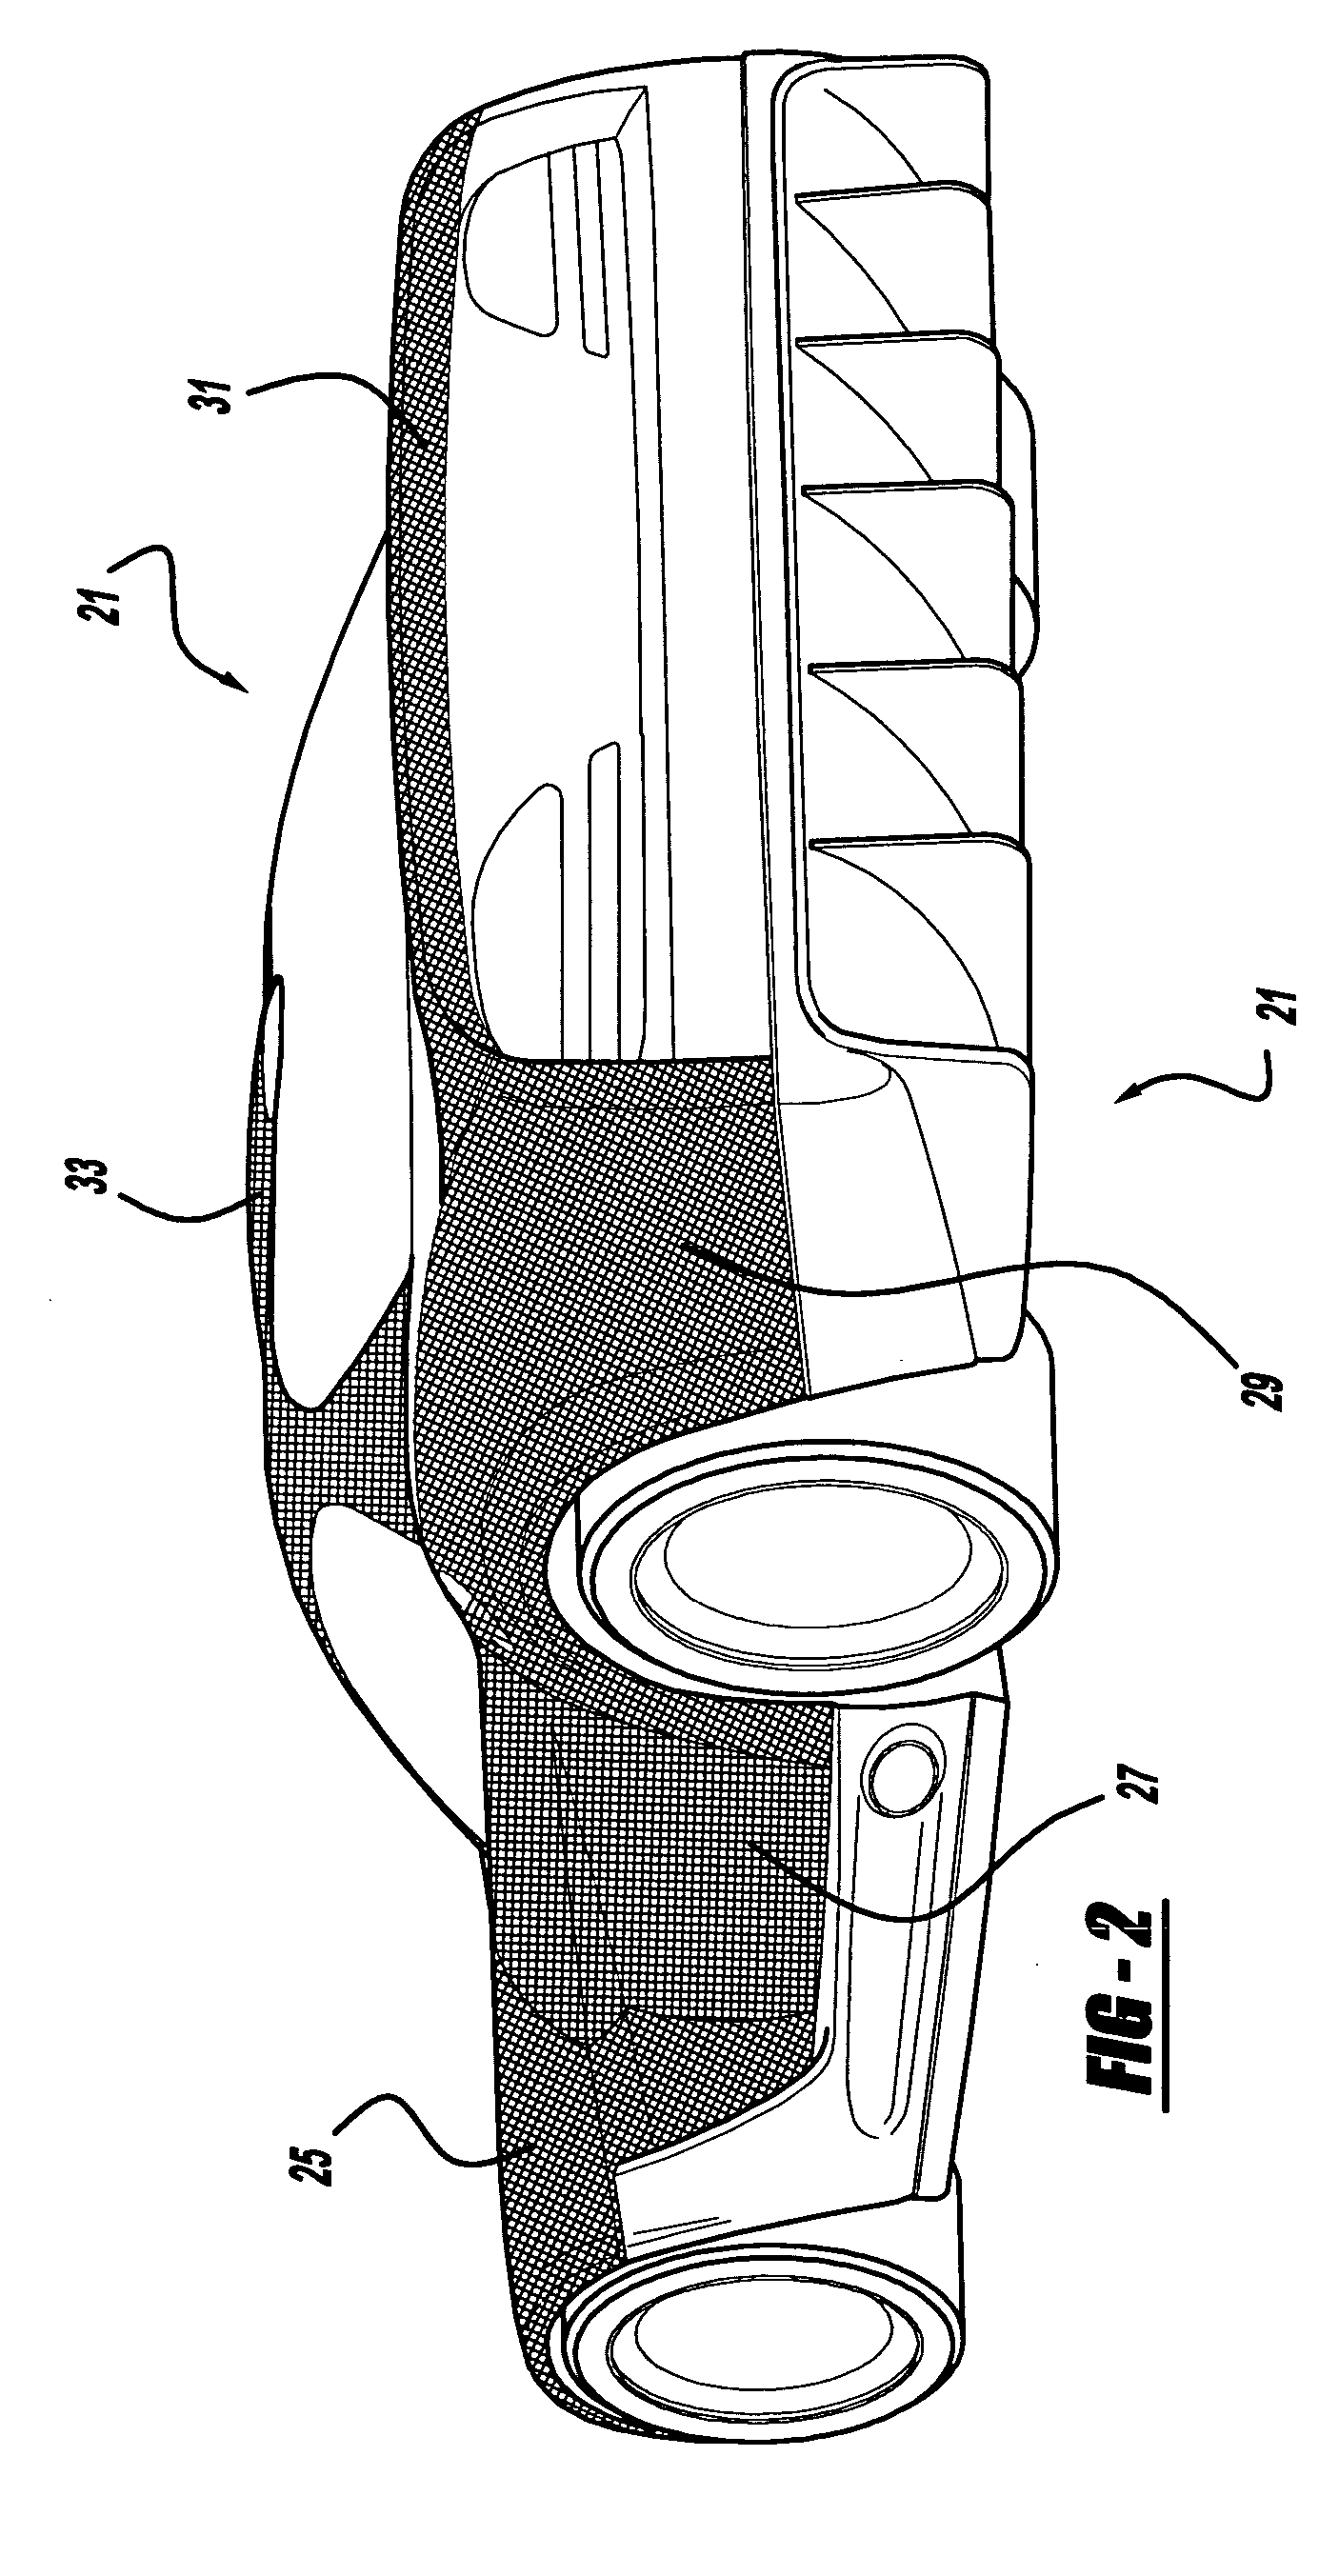 Hybrid composite product and system